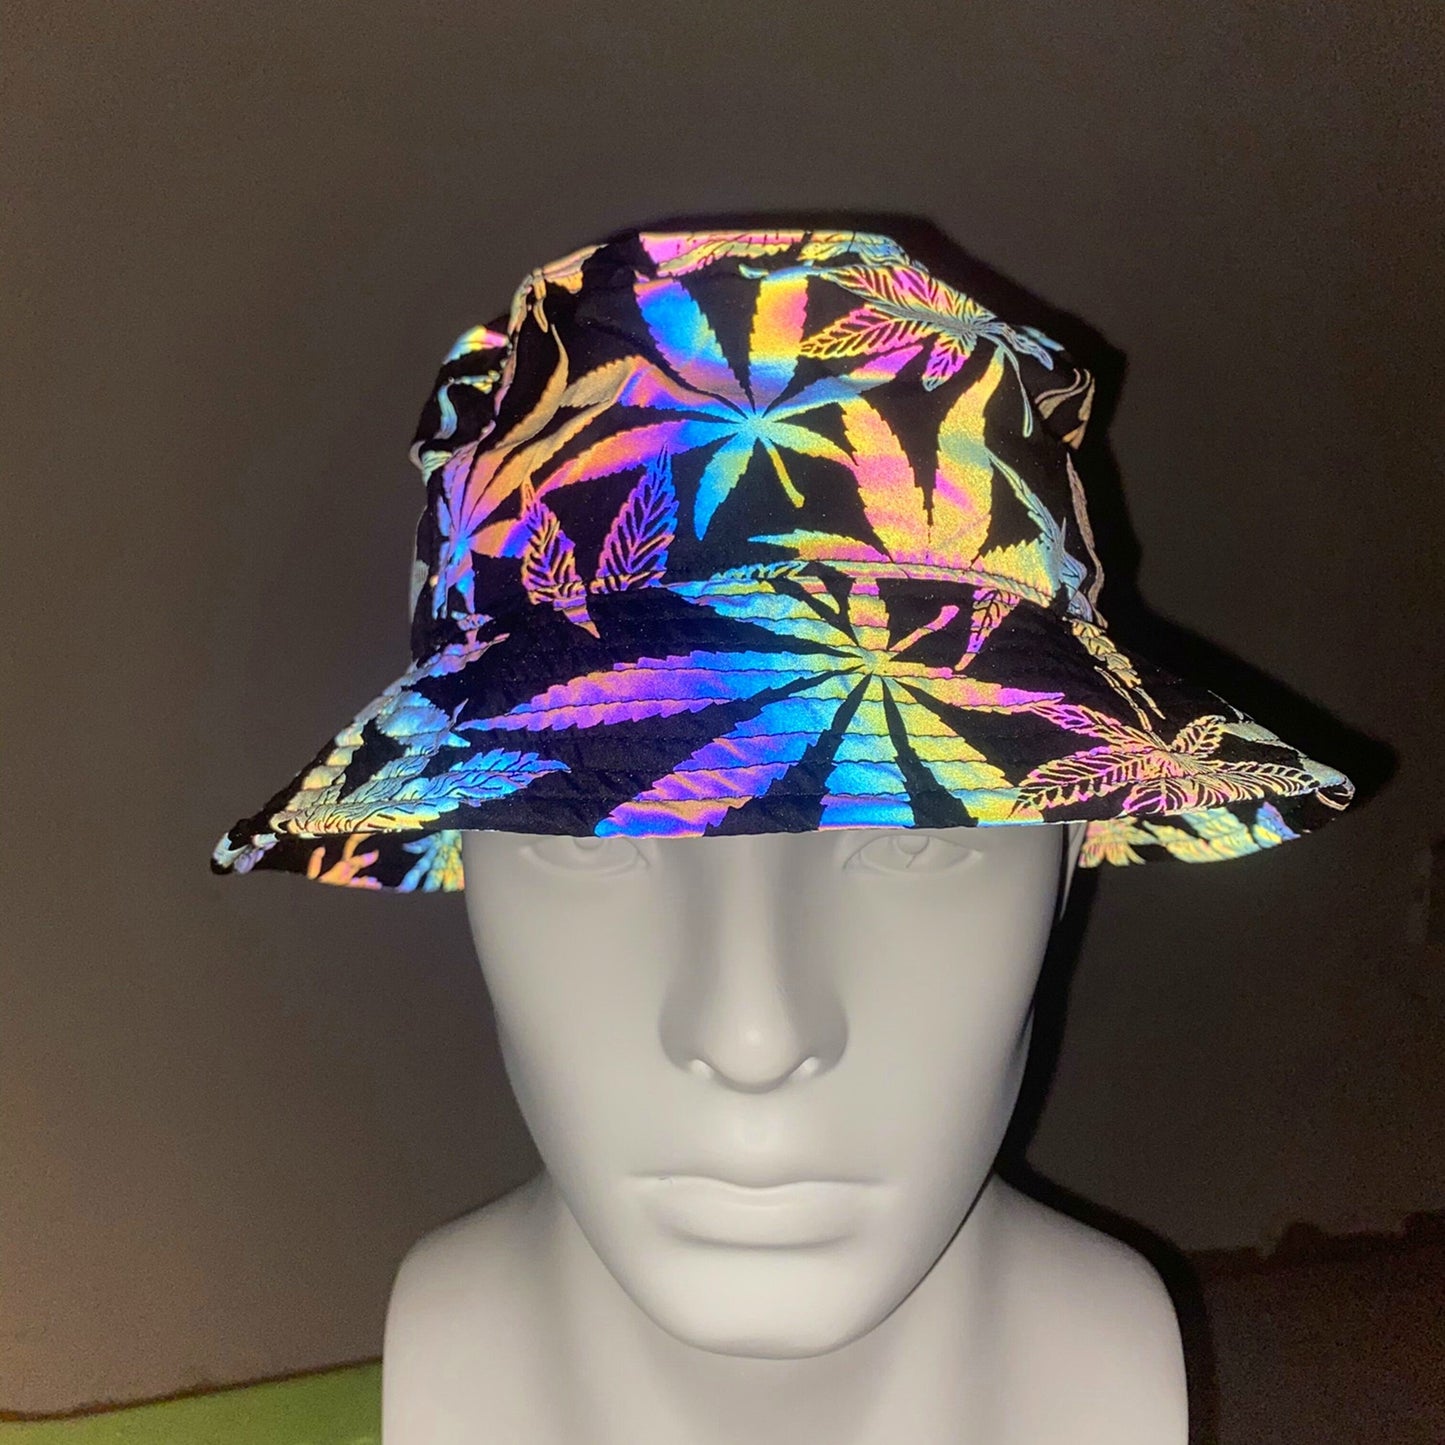 Holographic Reflective Unisex Bucket Hat Outdoor Summer Reflecting Cap Head Cover - Rave, Festival, Party, Concert - GOLDEN TOUCH APPARELS WOMEN